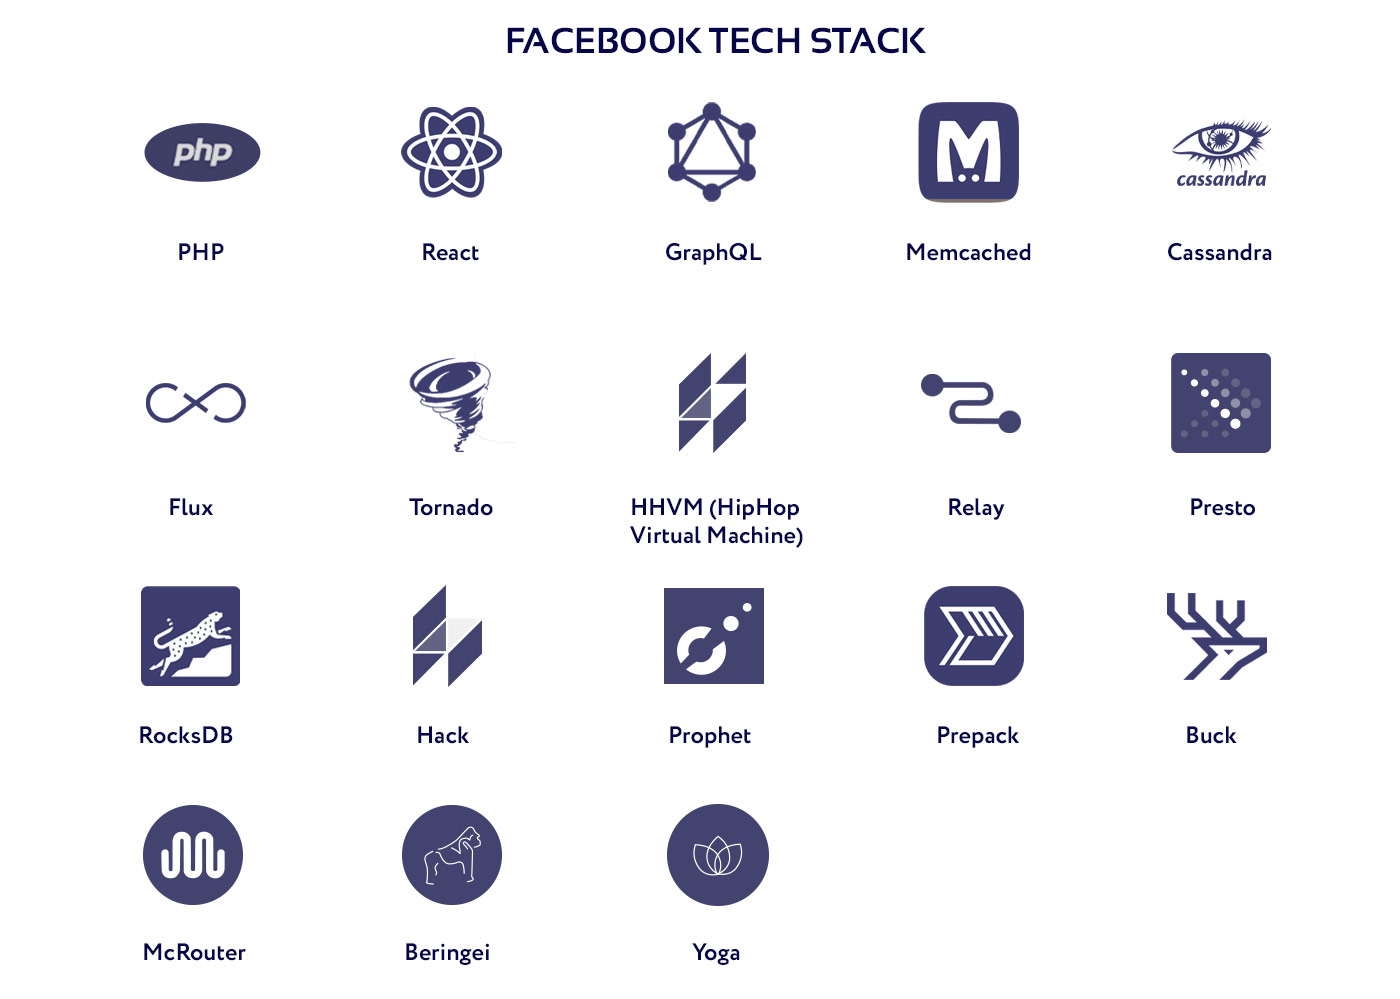 Diagram of the technology stack used by Facebook